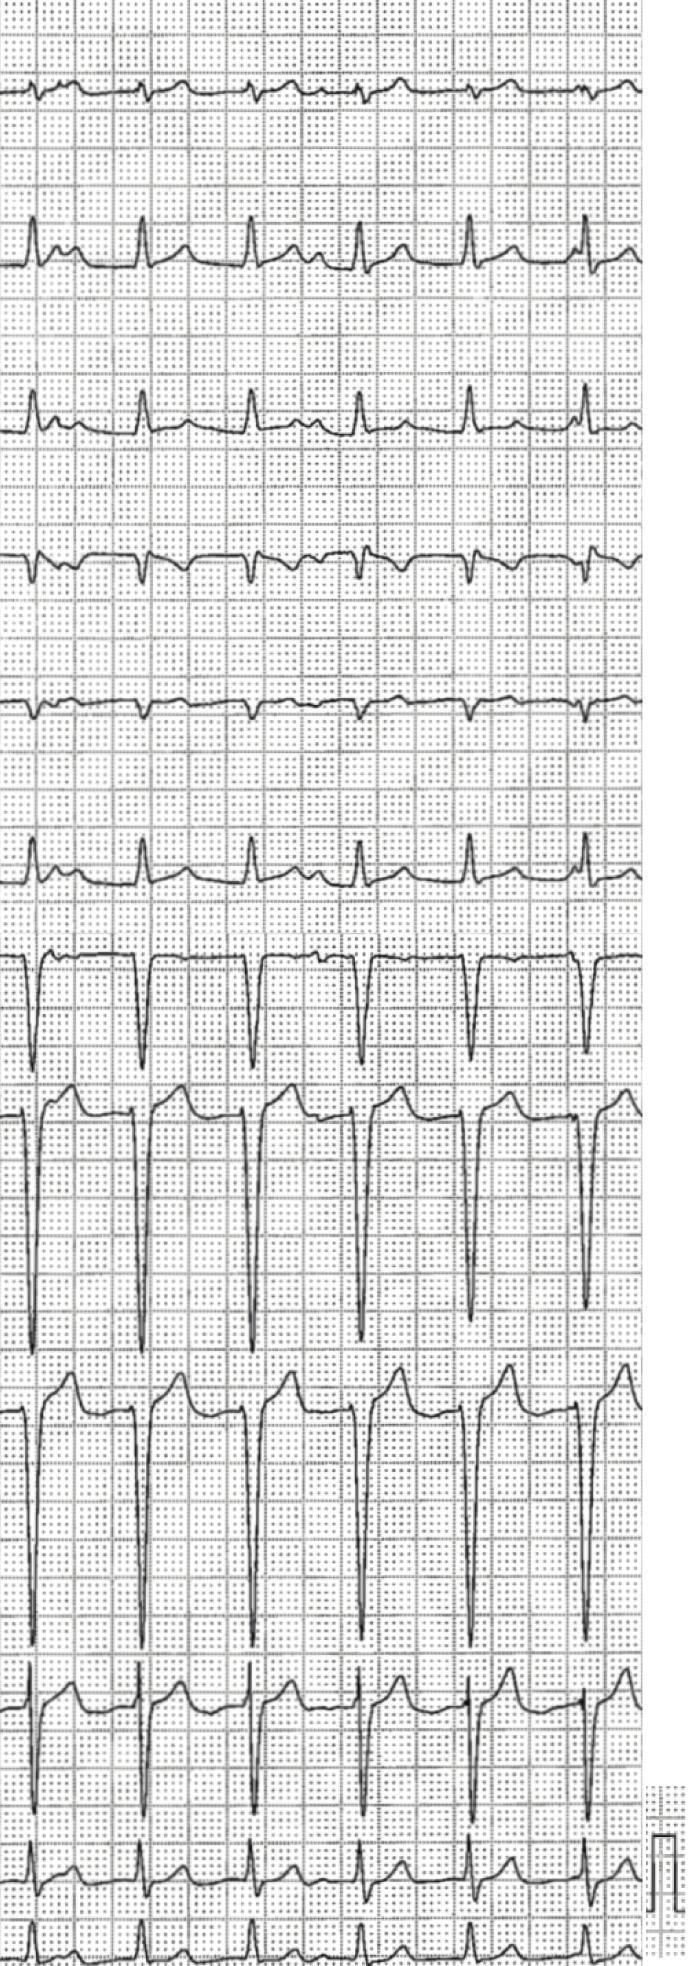 2 Figure 1: The baseline 12-lead electrocardiogram (ECG) in the supine position shows accelerated idioventricular rhythm (AVR) without atrioventricular conduction.